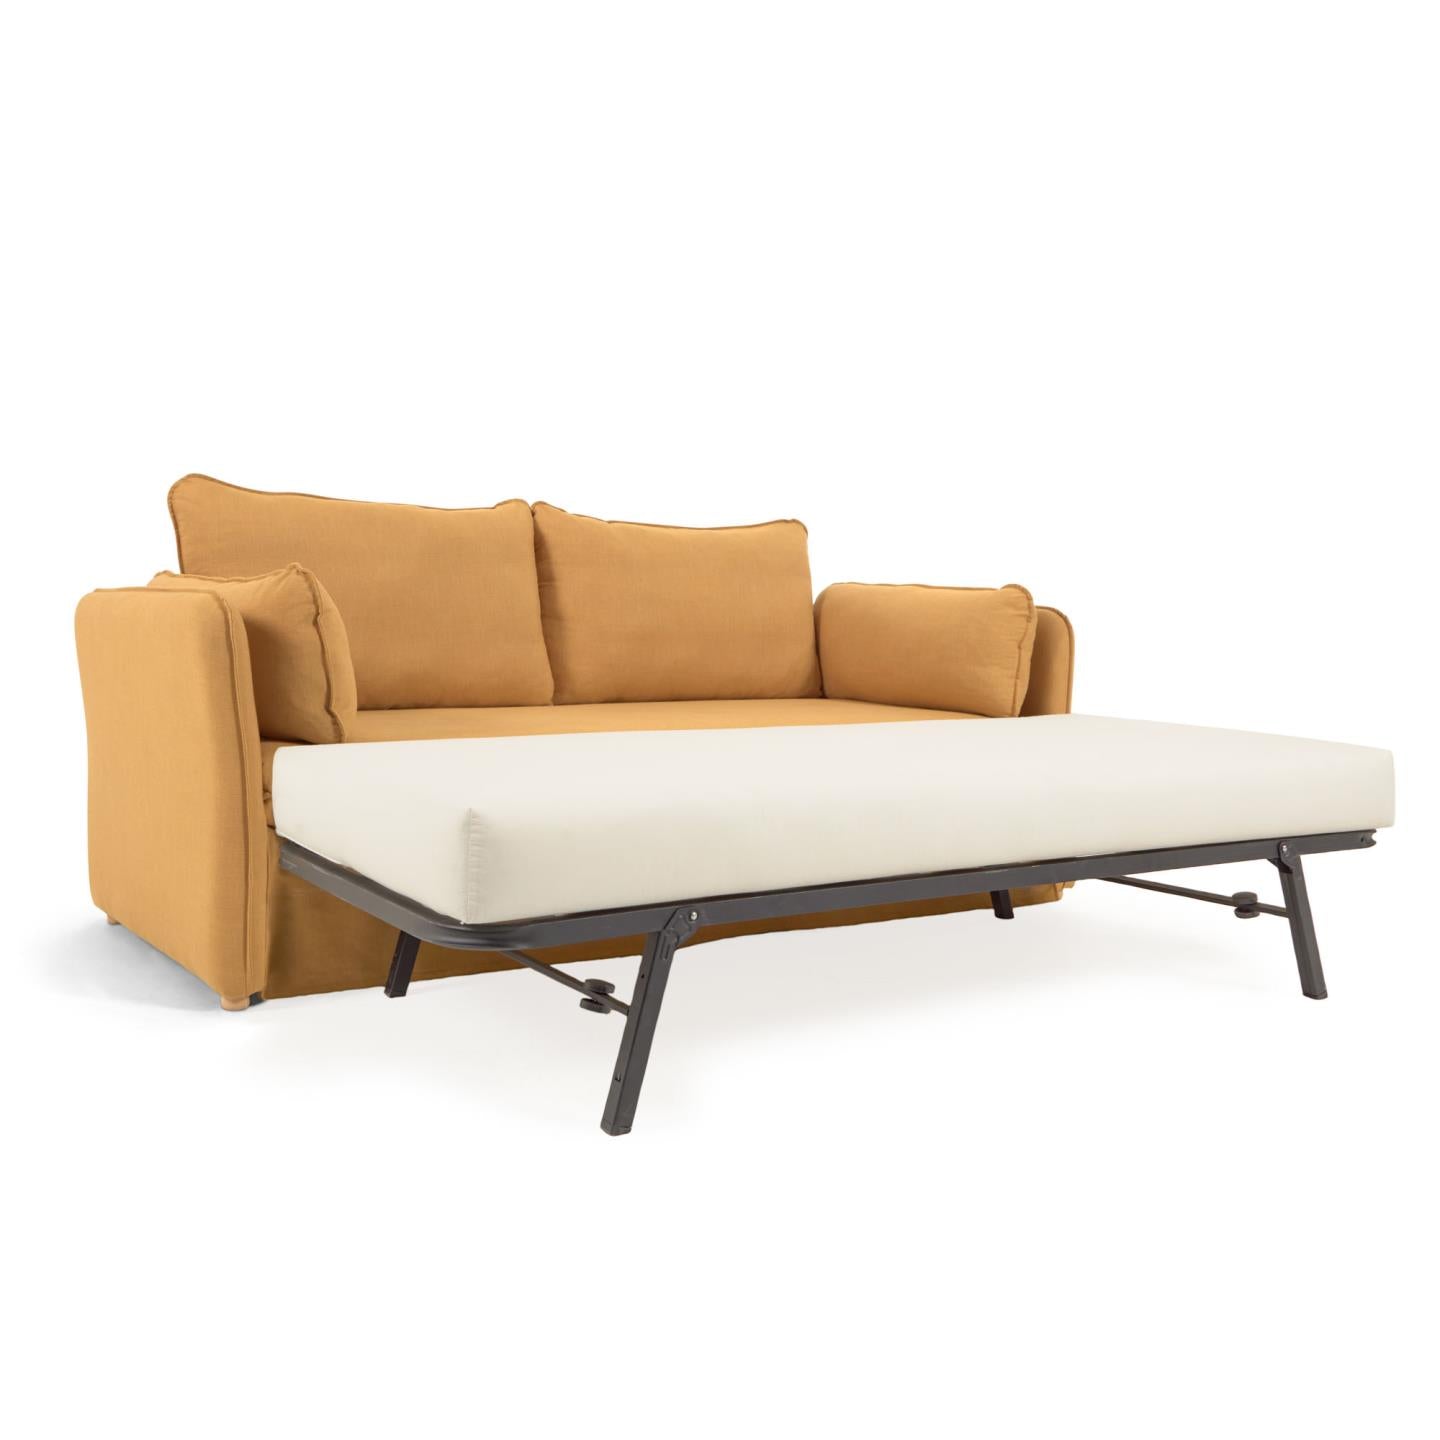 Tanit sofa bed in mustard with natural finish solid beech wood legs, 210 cm